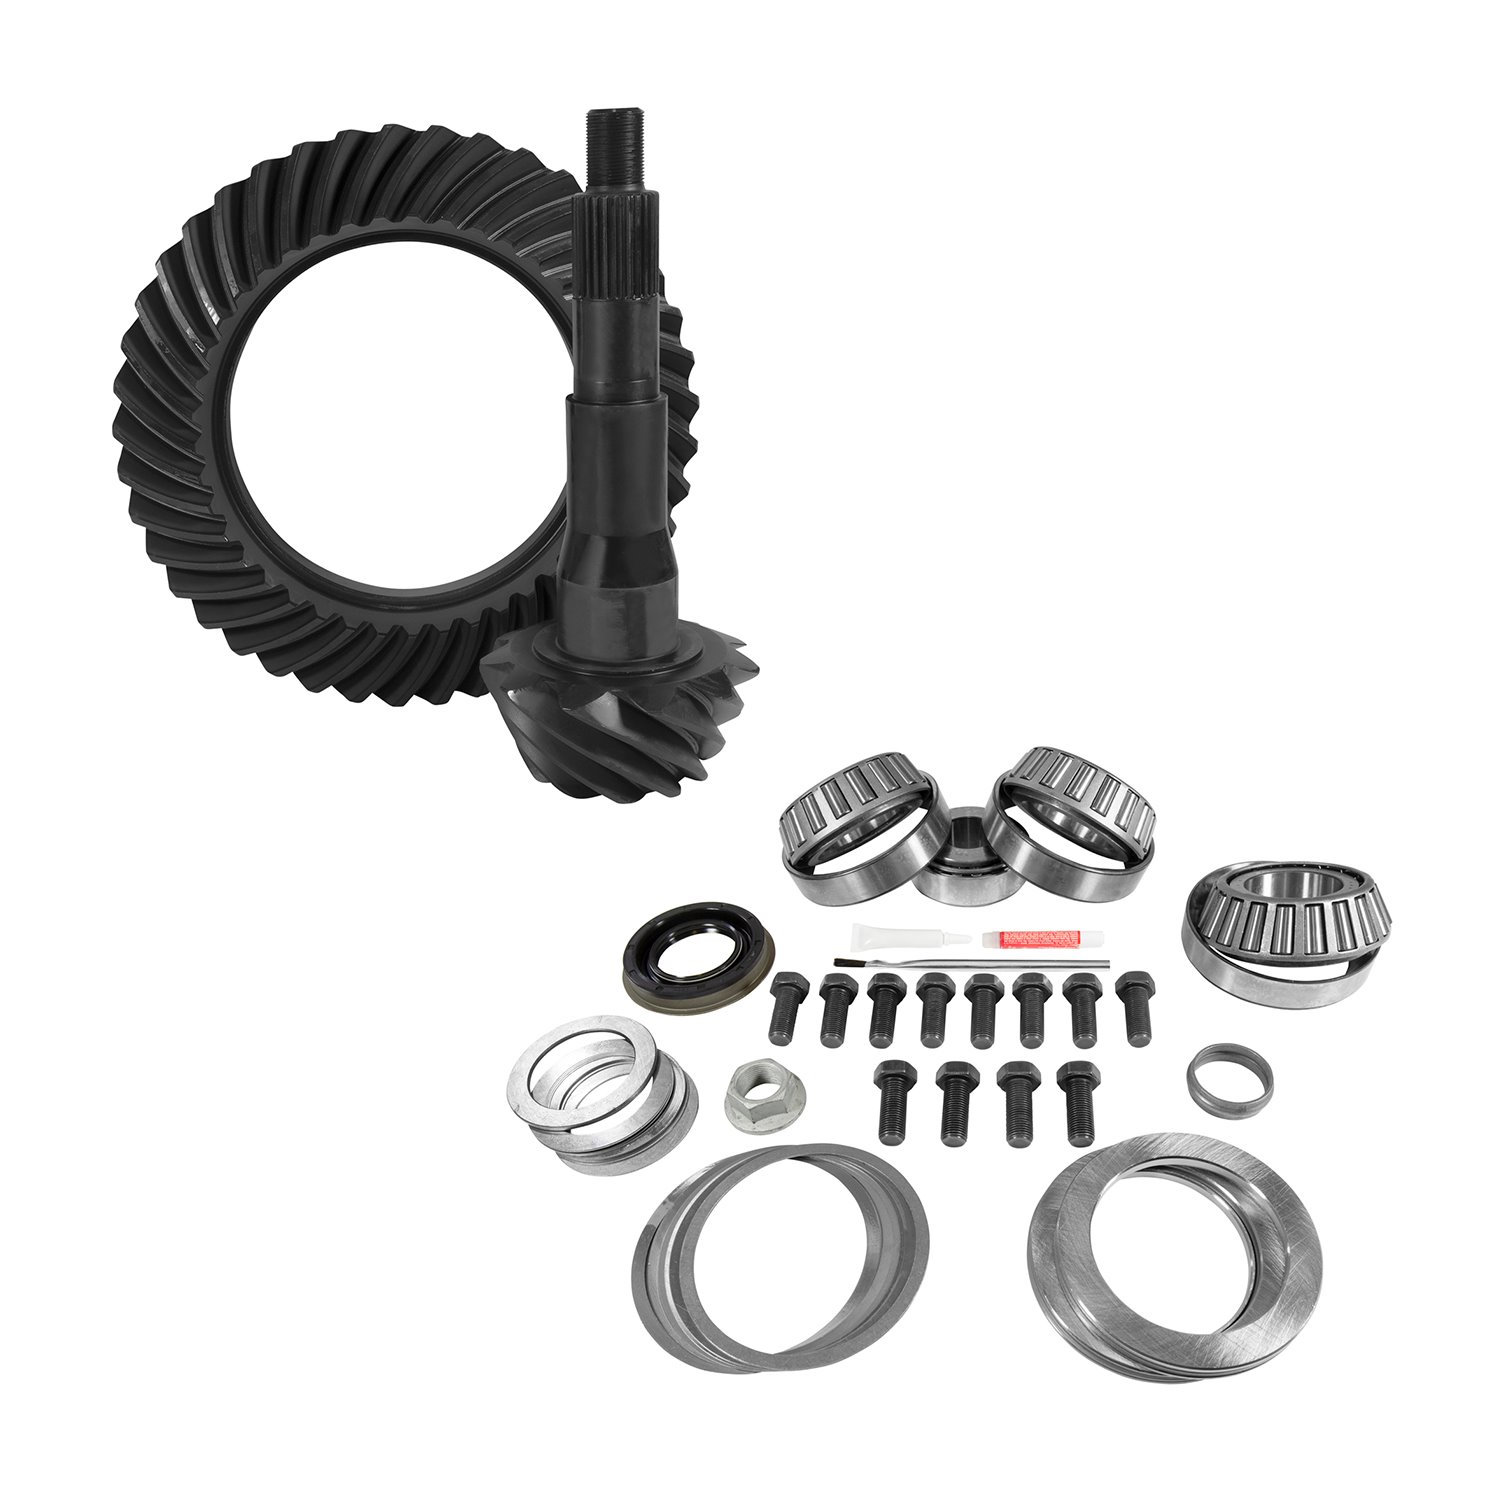 USA Standard 10845 Ring & Pinion And Install Kit, 10.5 in. Ford, 4.11 Rear